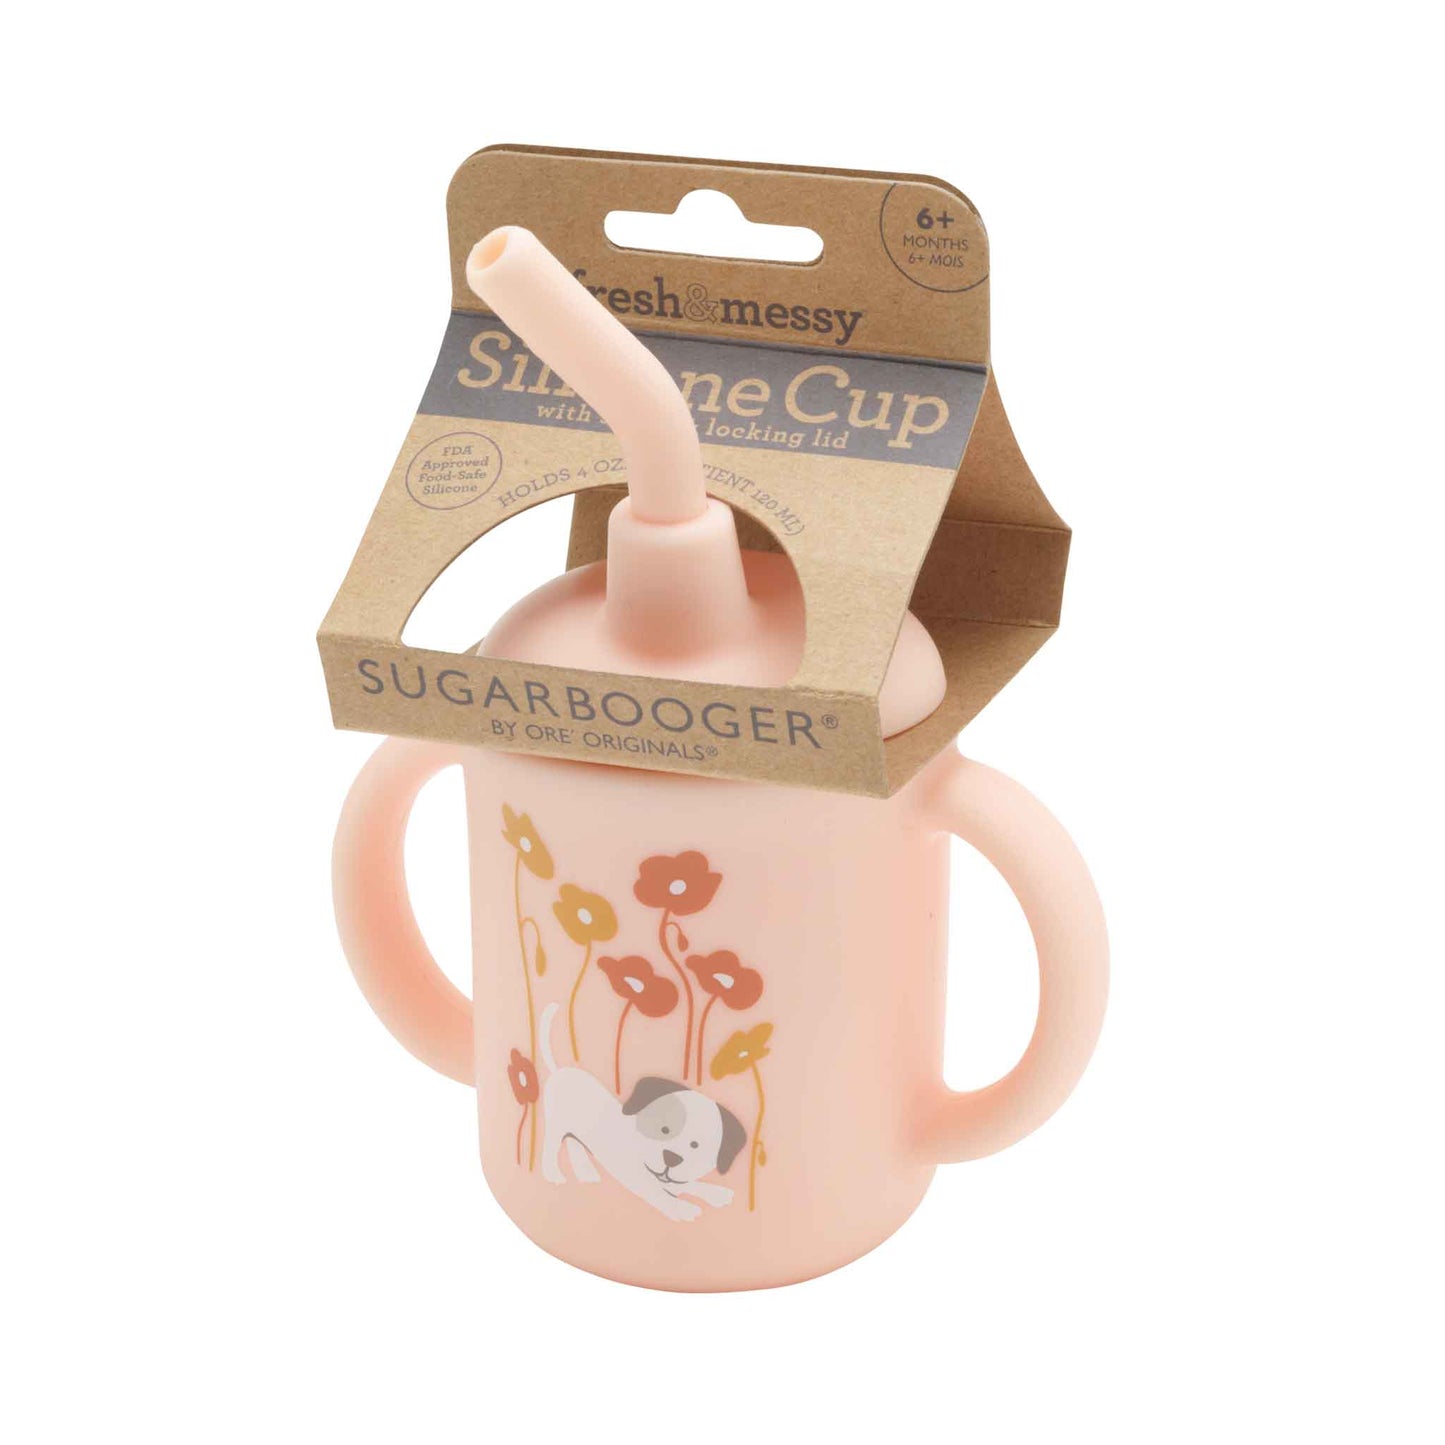 Sugarbooger by Ore’ Originals - Fresh & Messy Sippy Cup | Puppies & Poppies